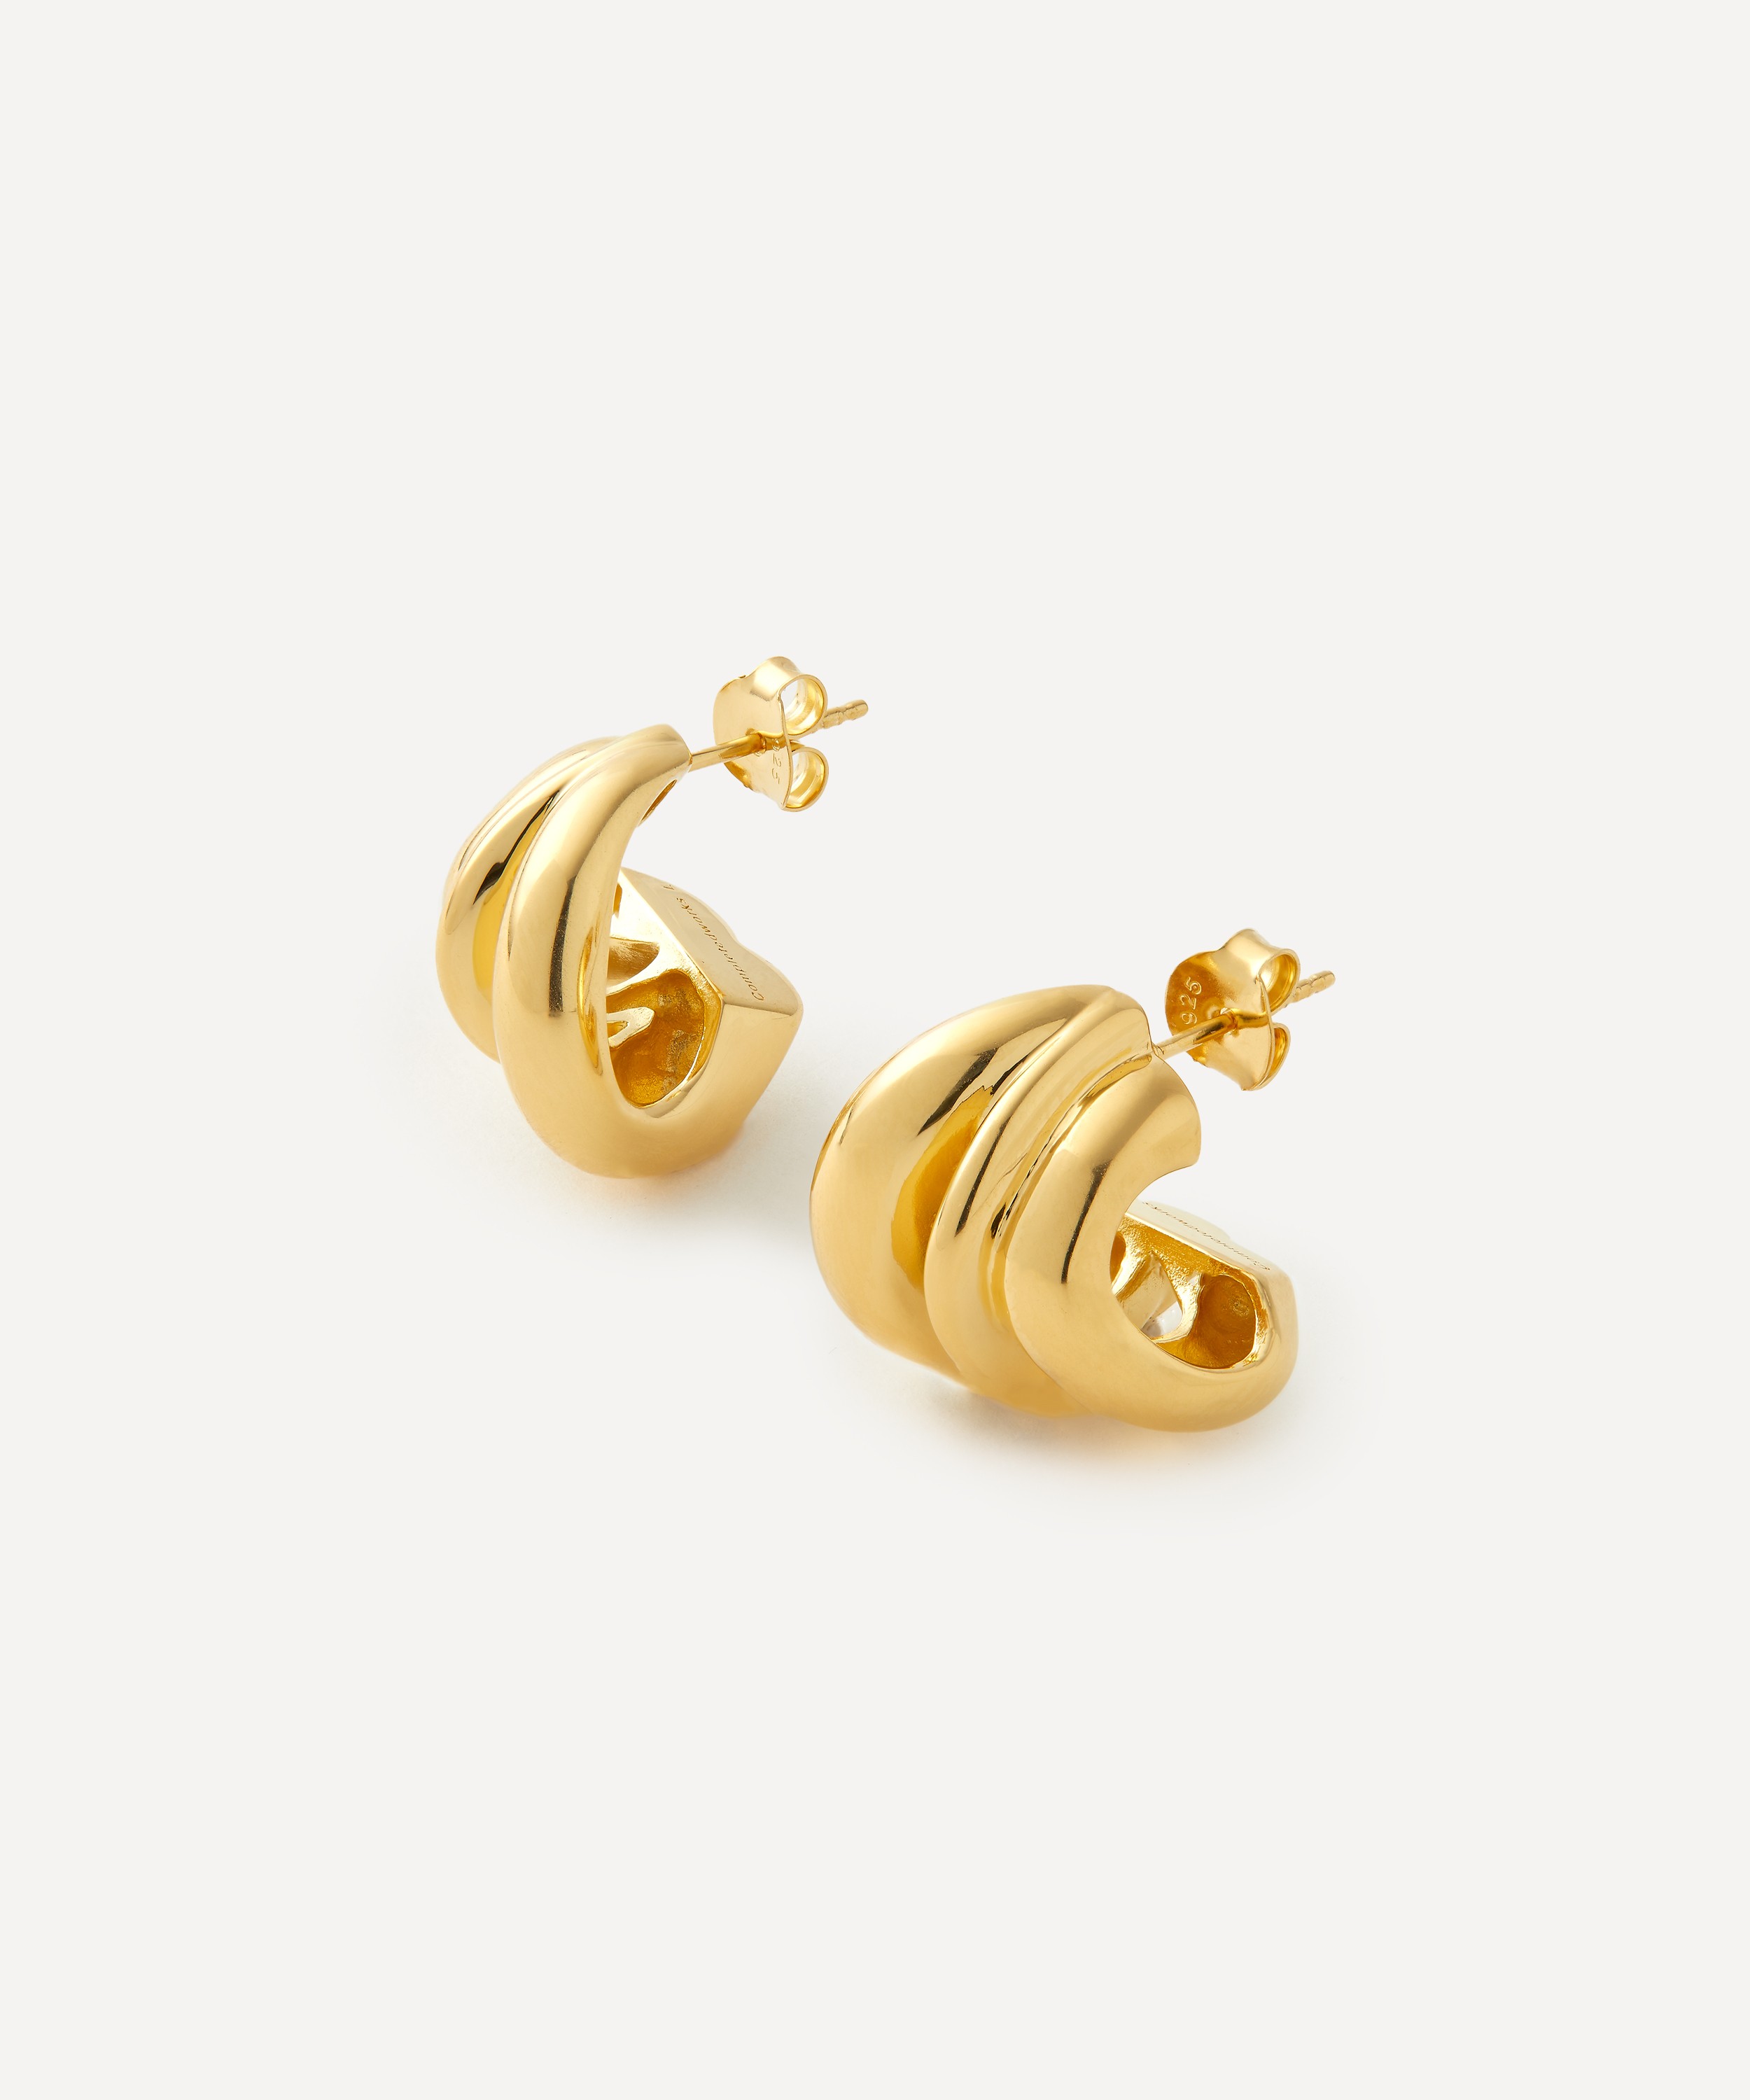 Completedworks - 18ct Gold-Plated Vermeil Silver Stud Earrings